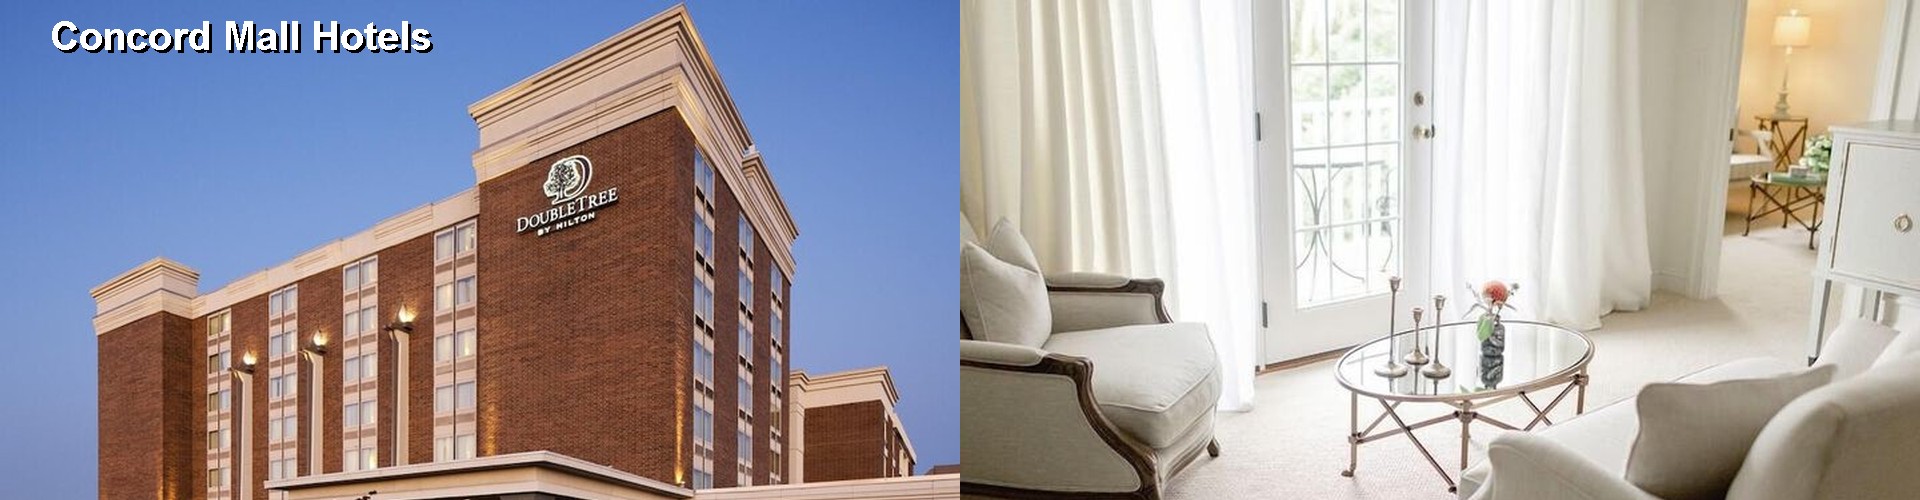 3 Best Hotels near Concord Mall